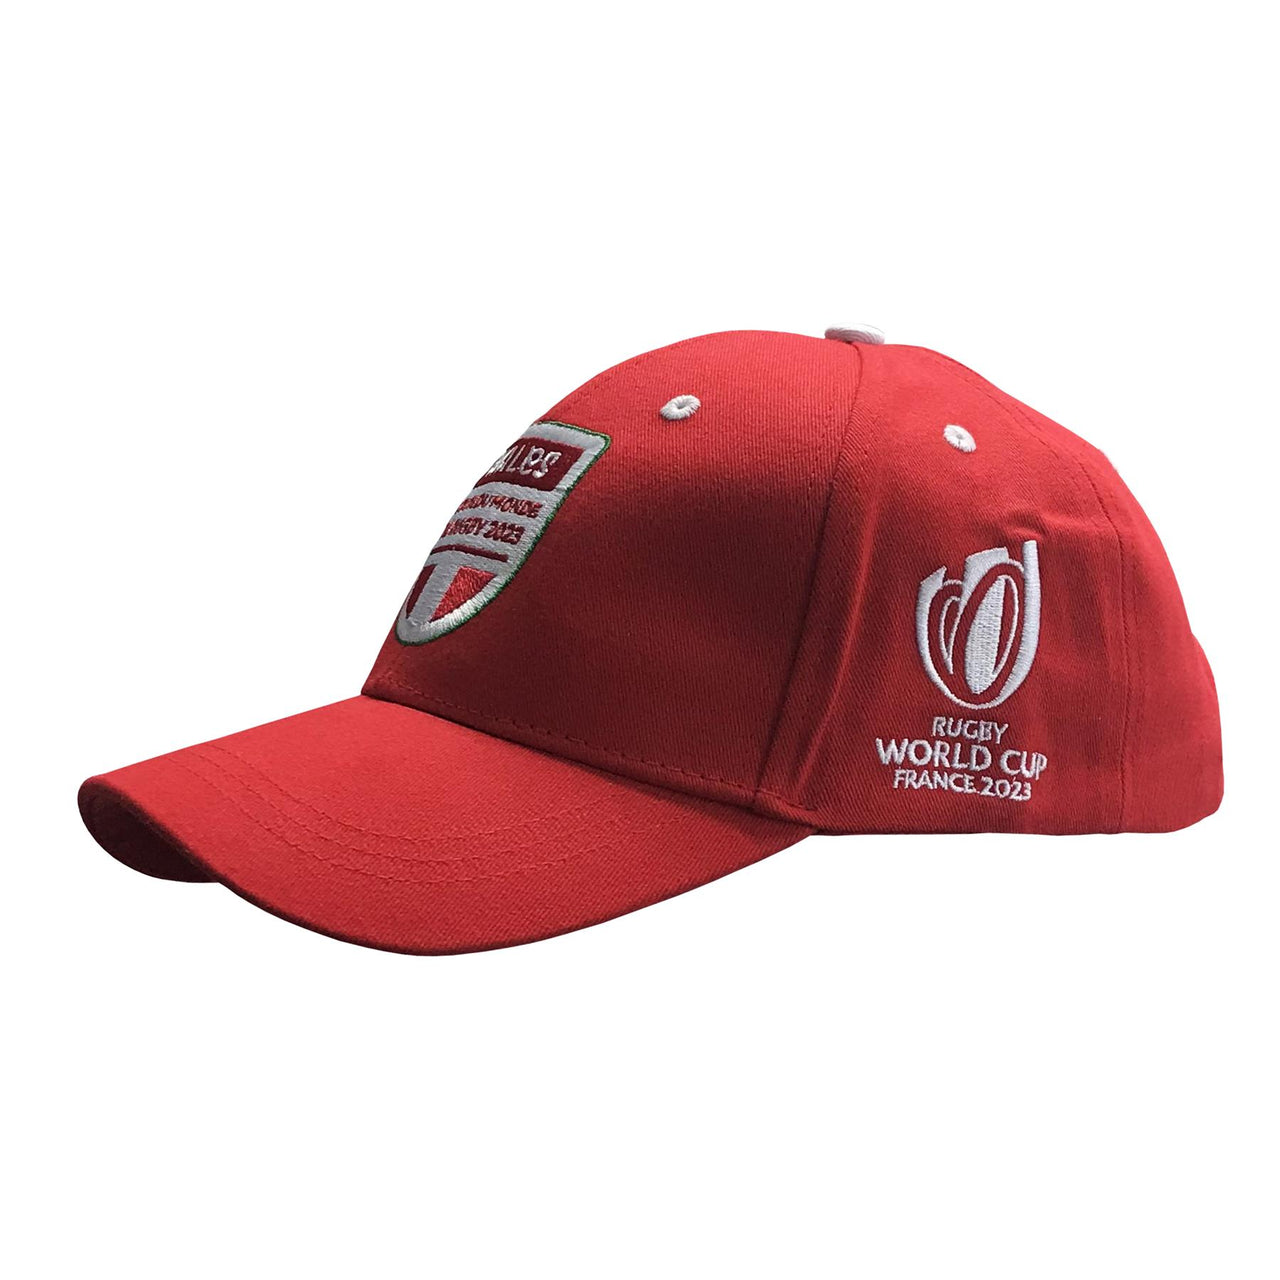 Rugby World Cup 2023 Baseball Cap | Wales